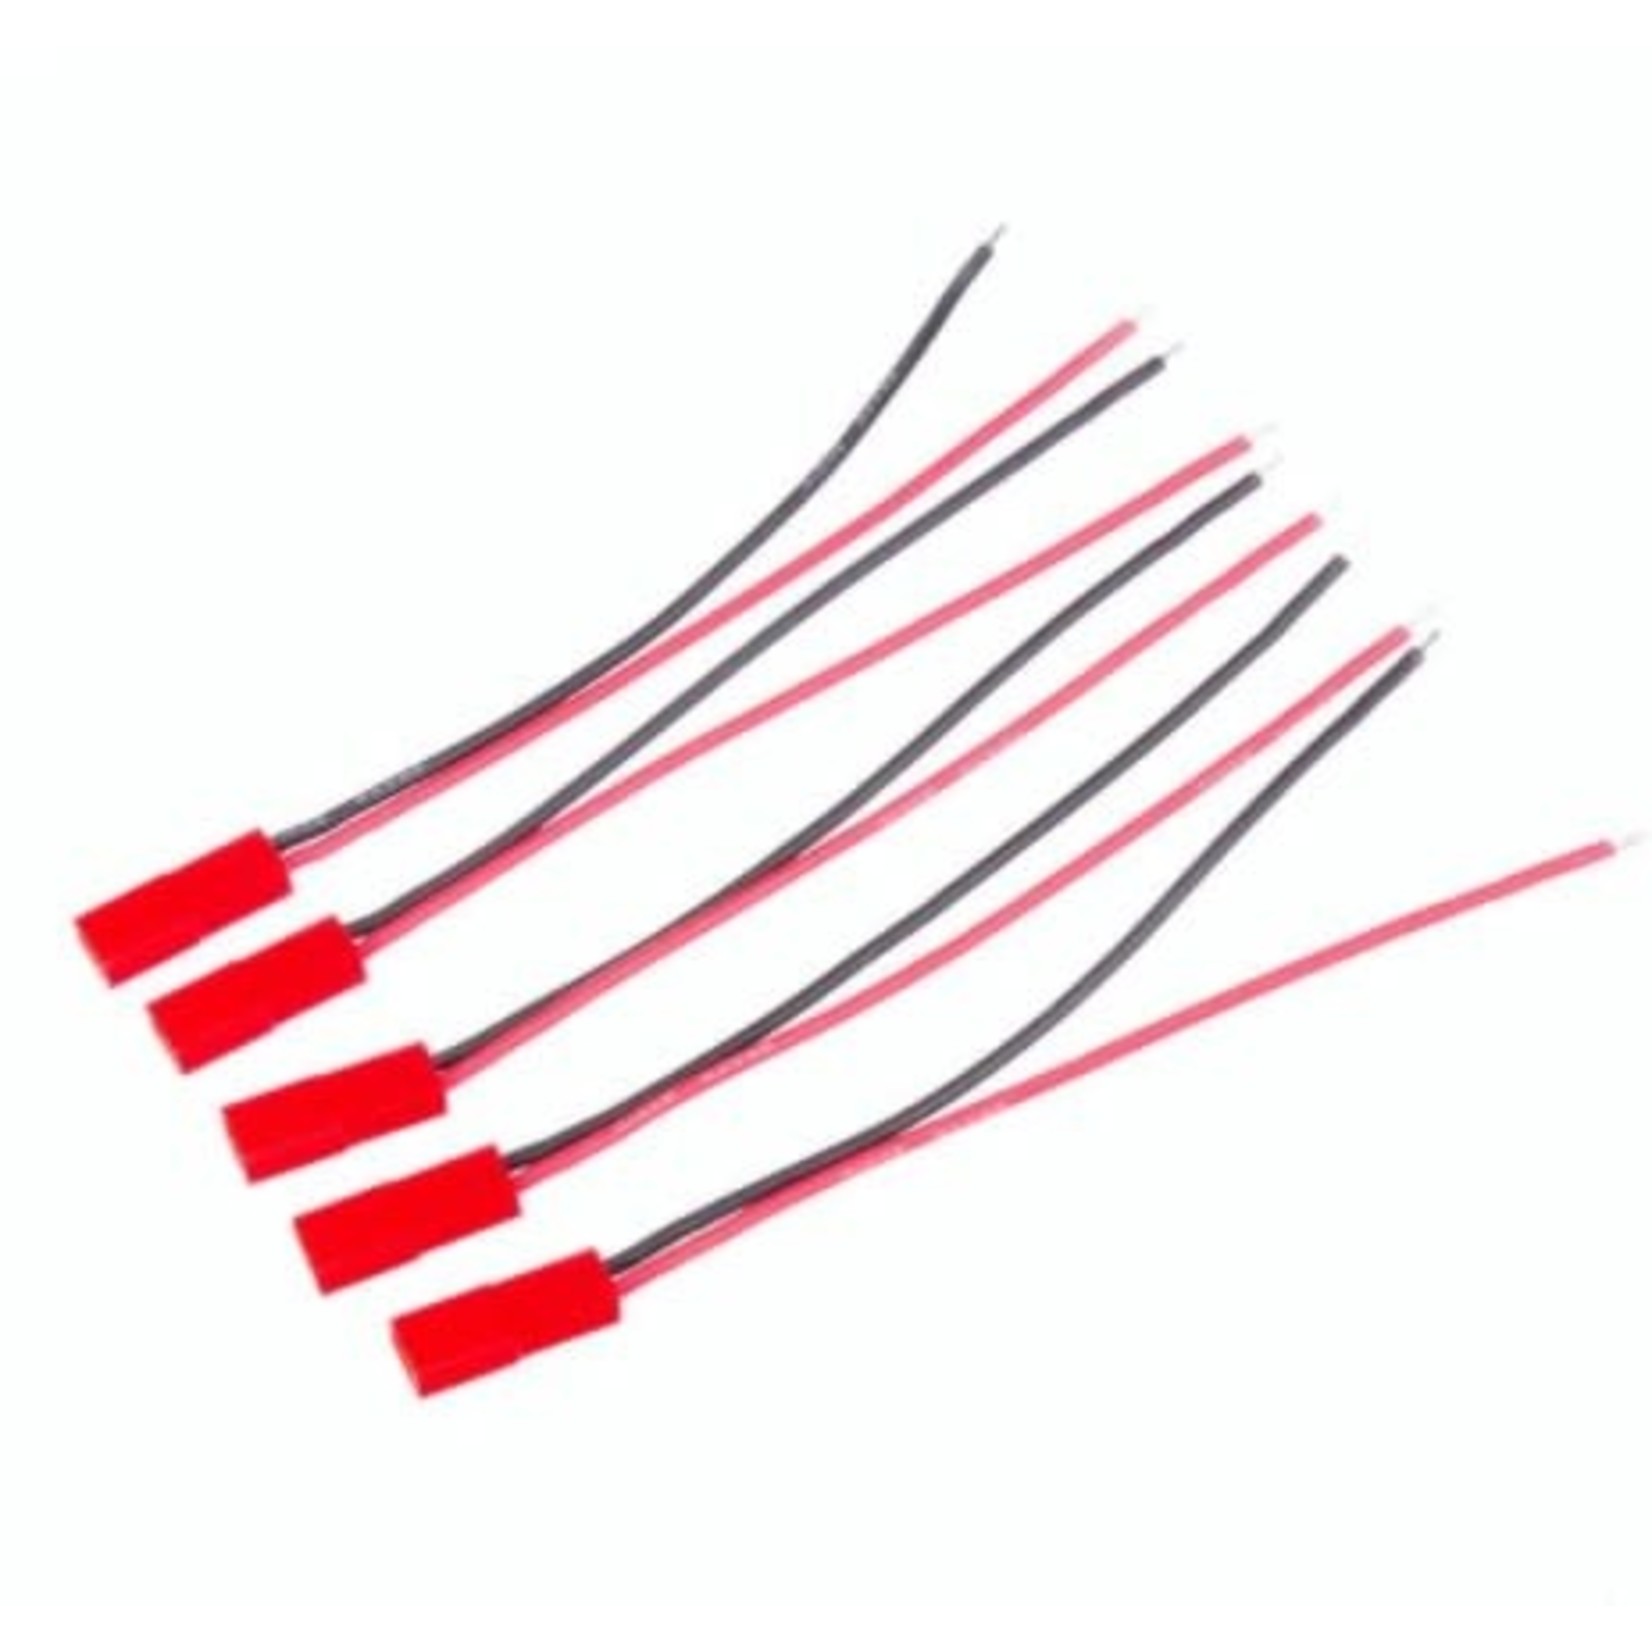 2U Hobby JST Pigtail Male Connectors for Charger/ESC 5 Pieces